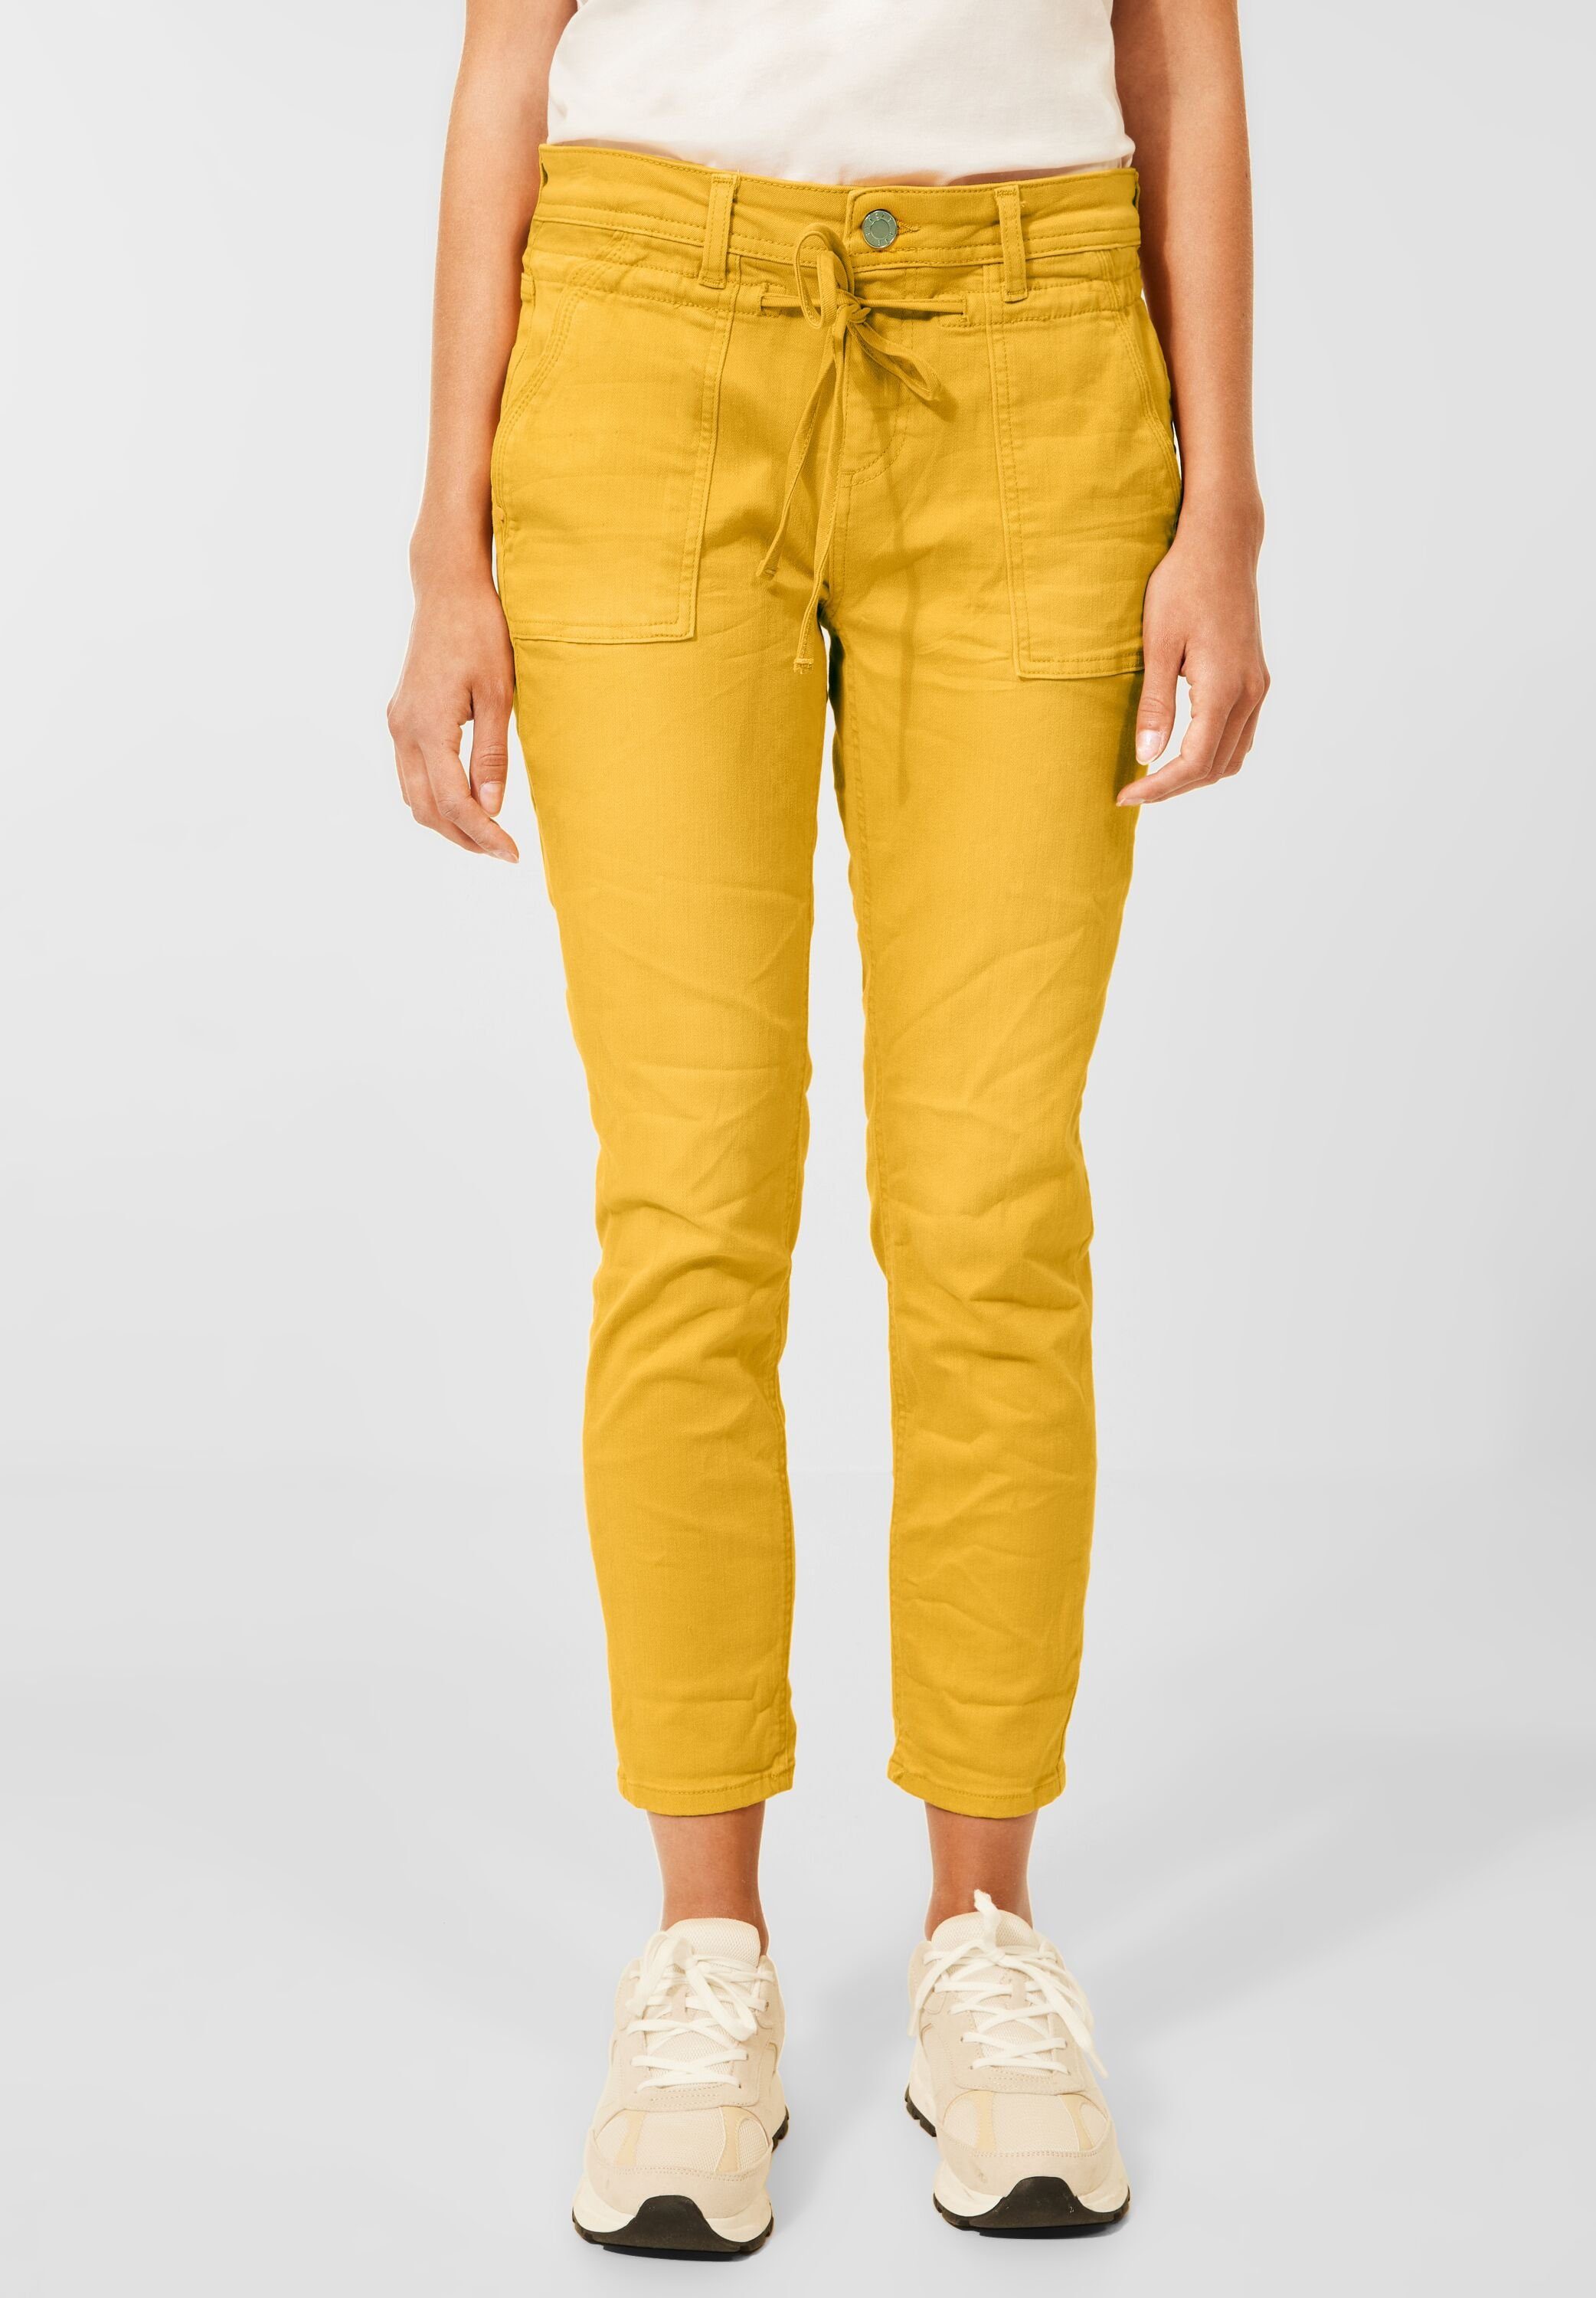 STREET ONE Bequeme Jeans Street (1-tlg) sunset Einschubtaschen in dull Sunset yellow Loose One wash Dull Farbige Fit Jeans